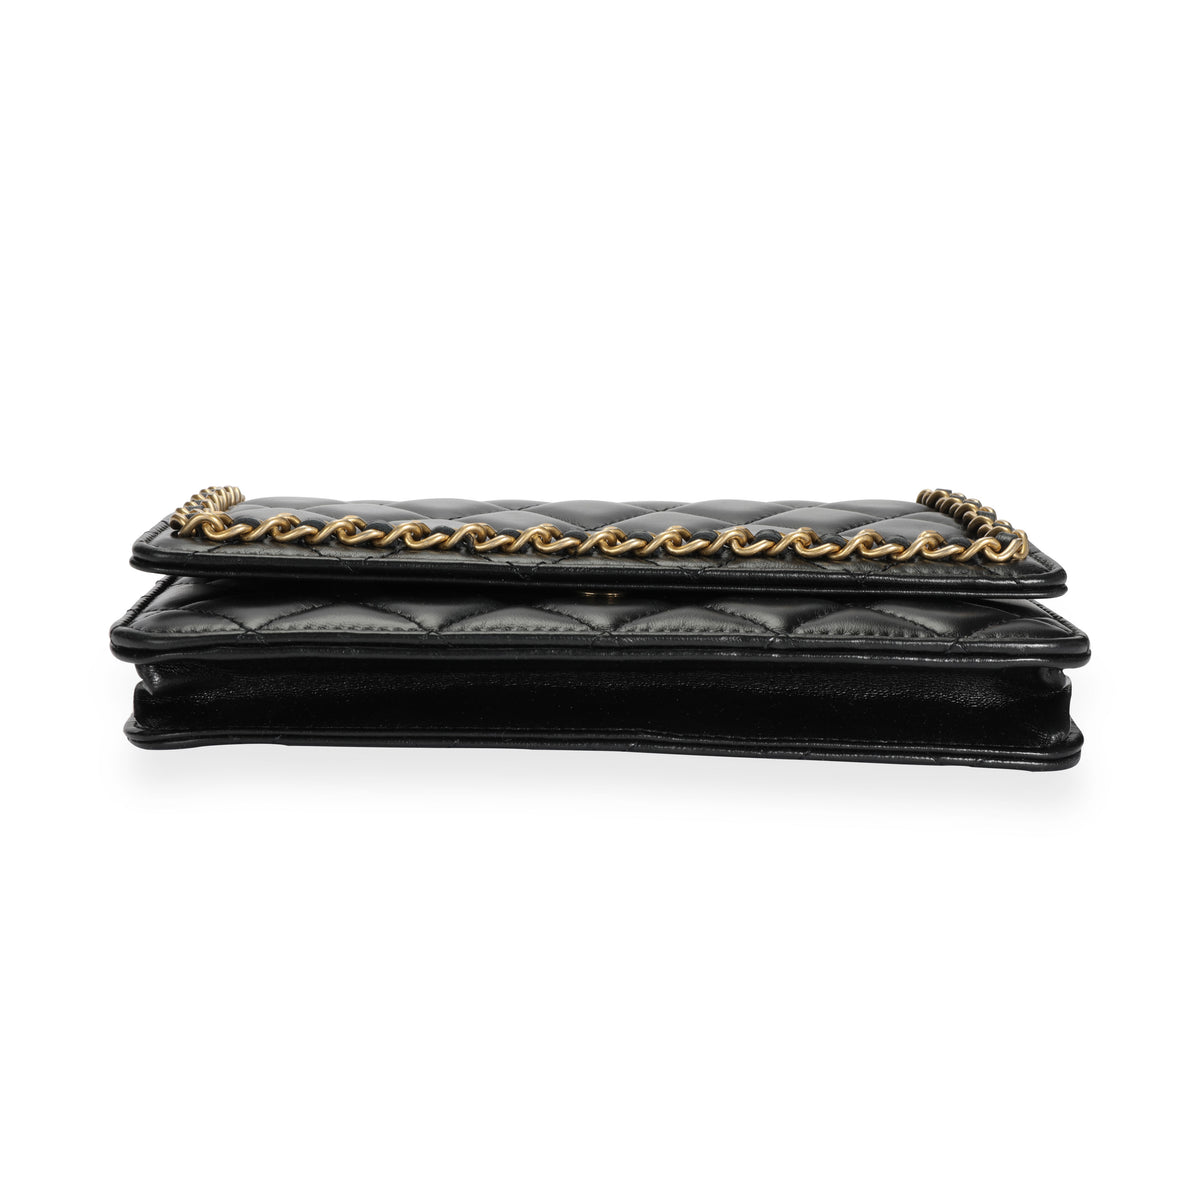 Chanel Black Lambskin Quilted Wallet on Chain